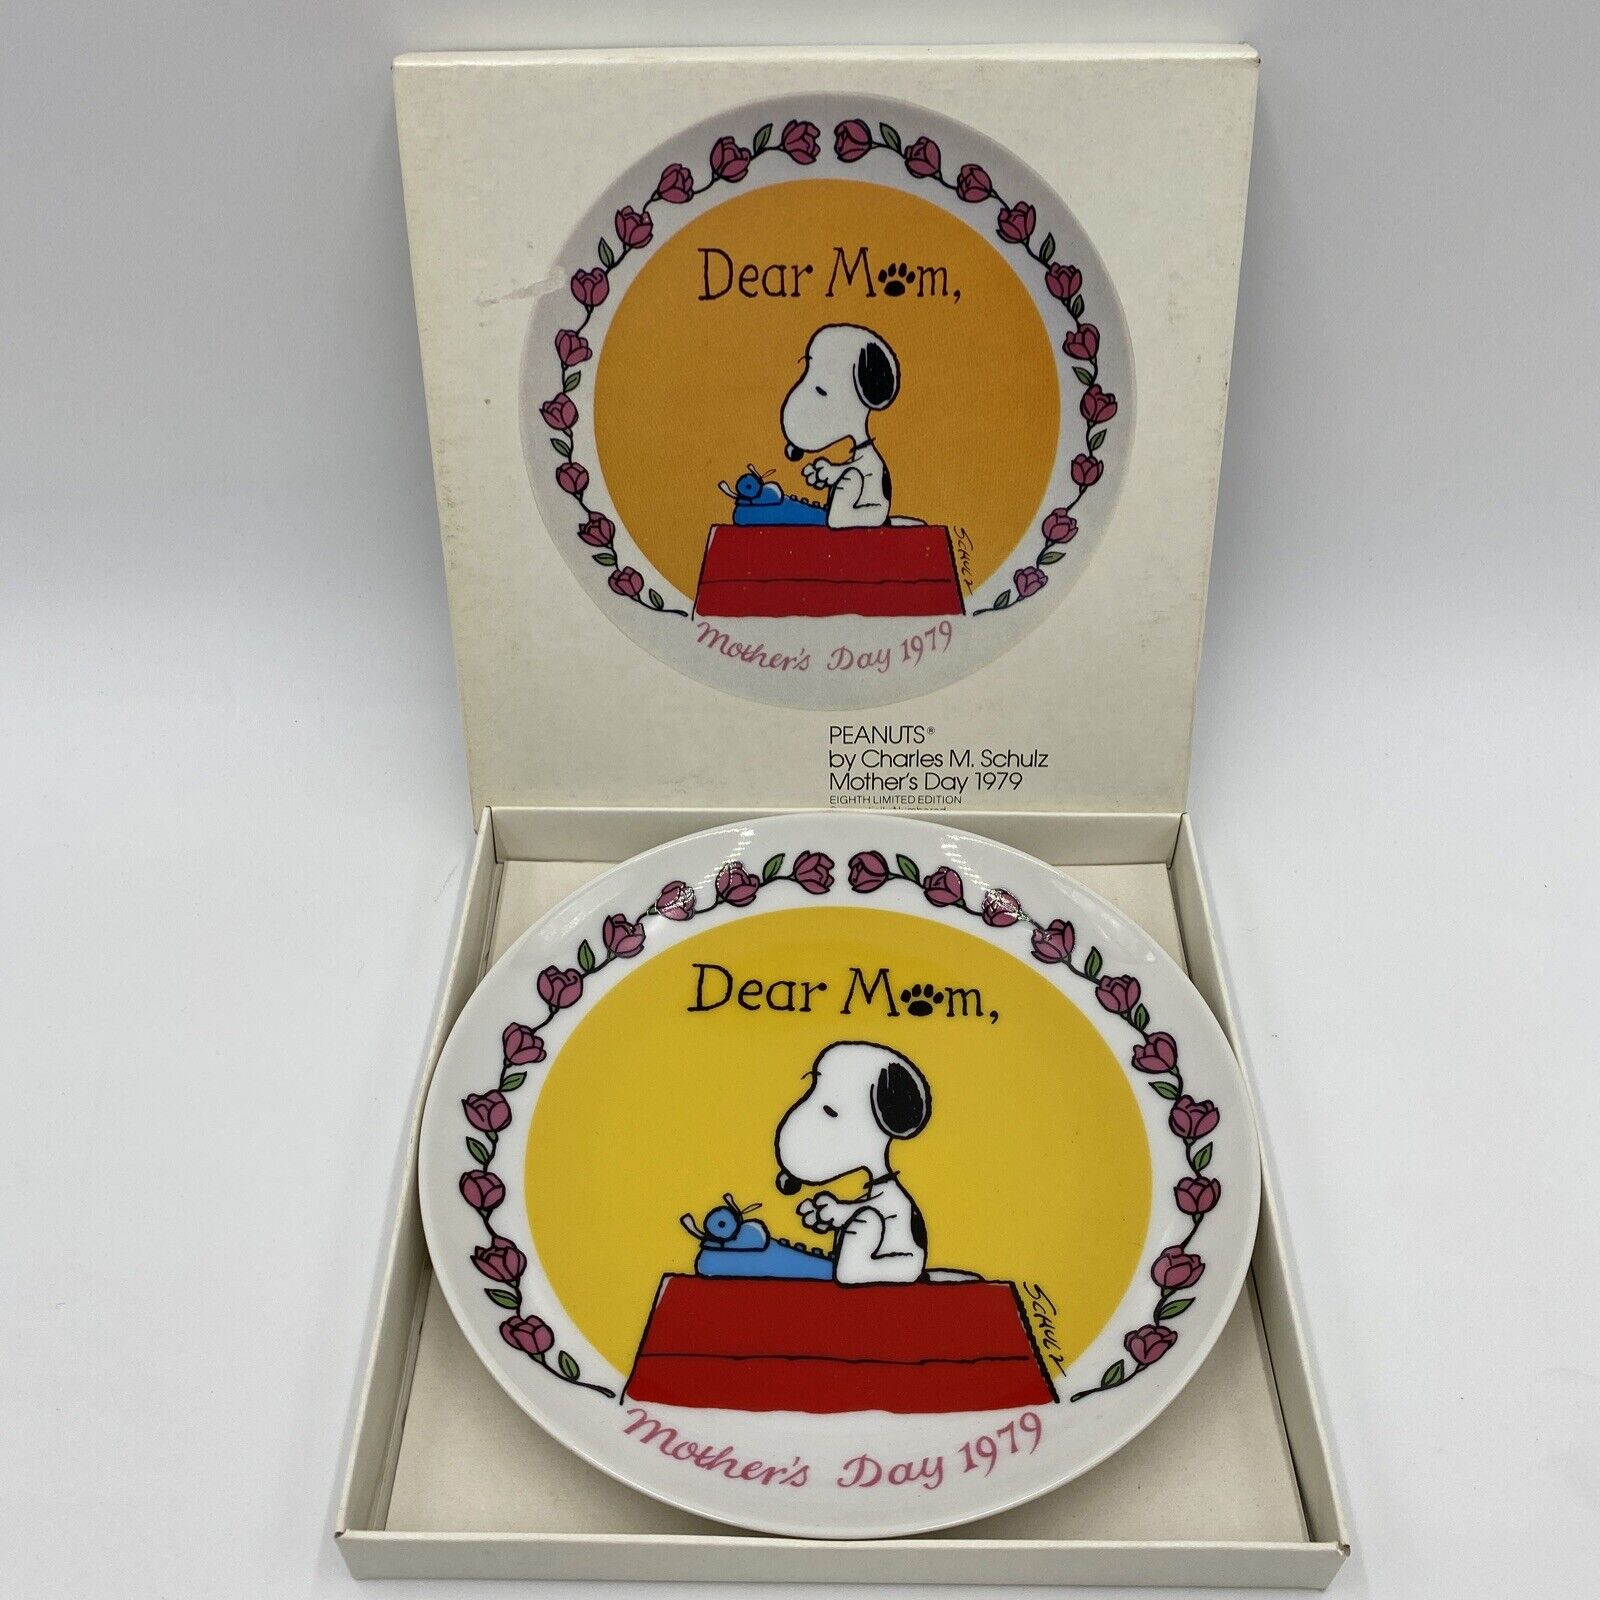 Peanuts Snoopy Dear Mom Mother’s Day 1979 Limited Edition Plate (Charley Brown)